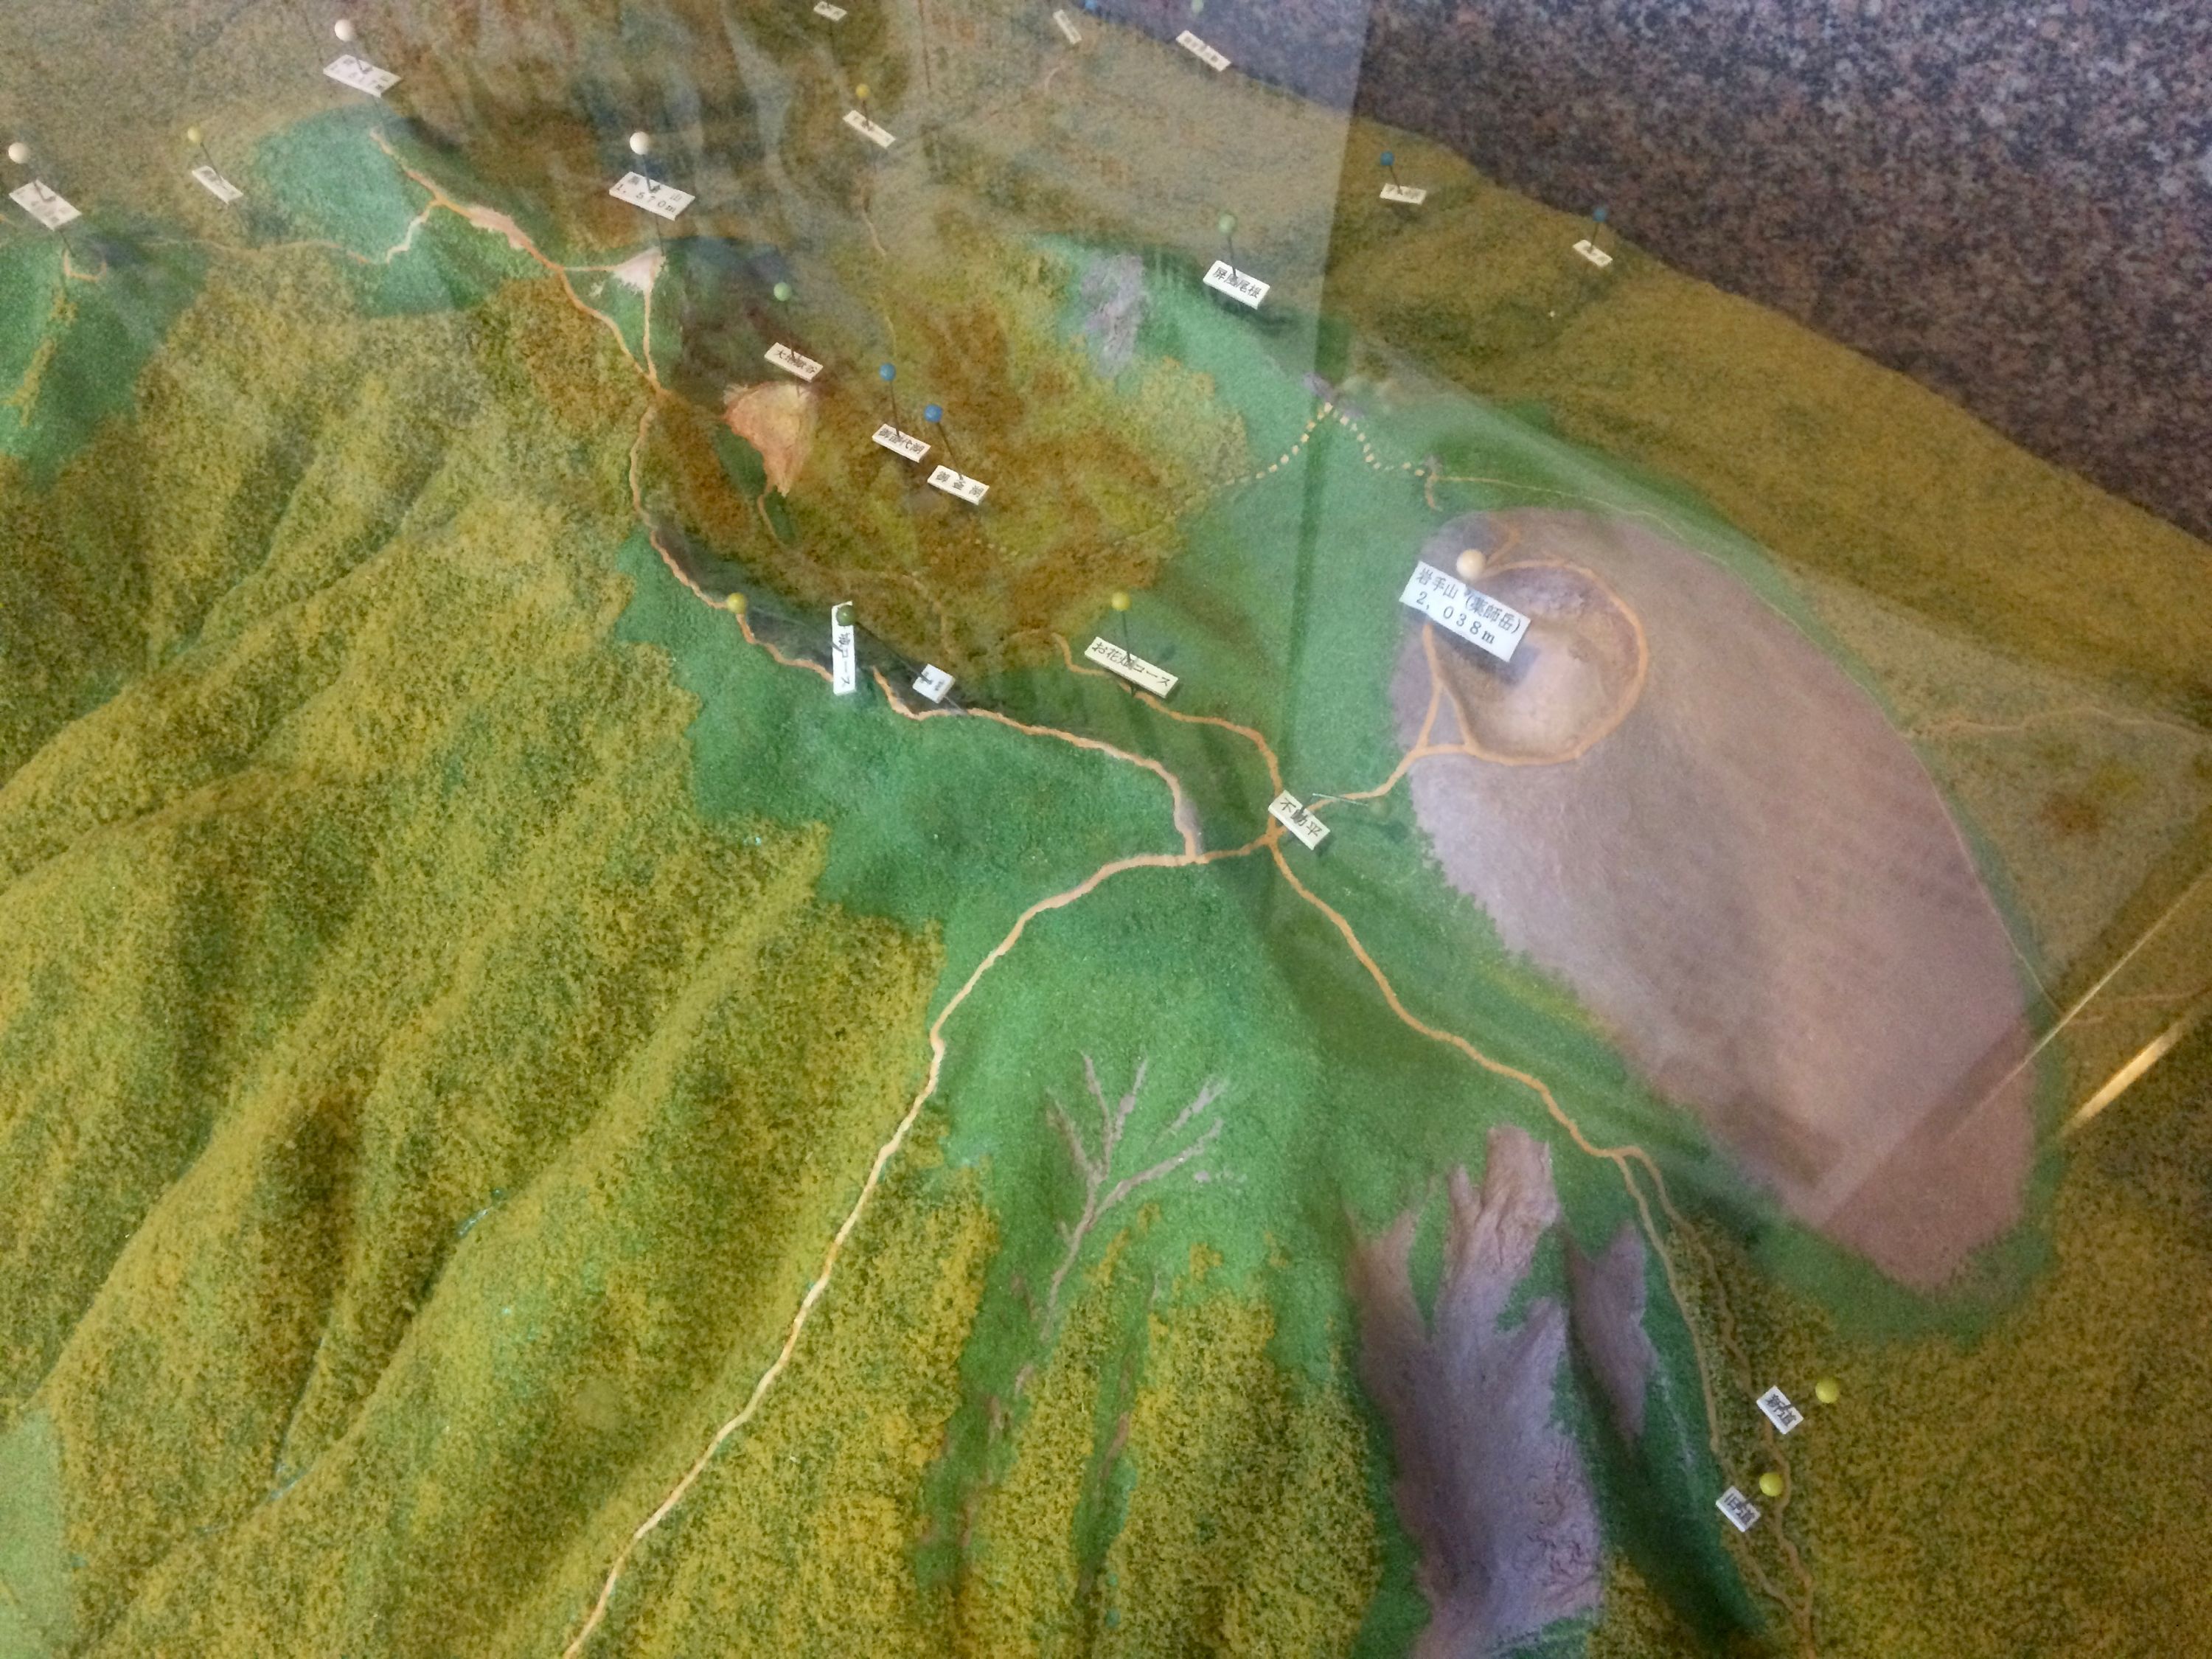 A three-dimensional model of Mount Iwate, showing the traild leading to its crater.